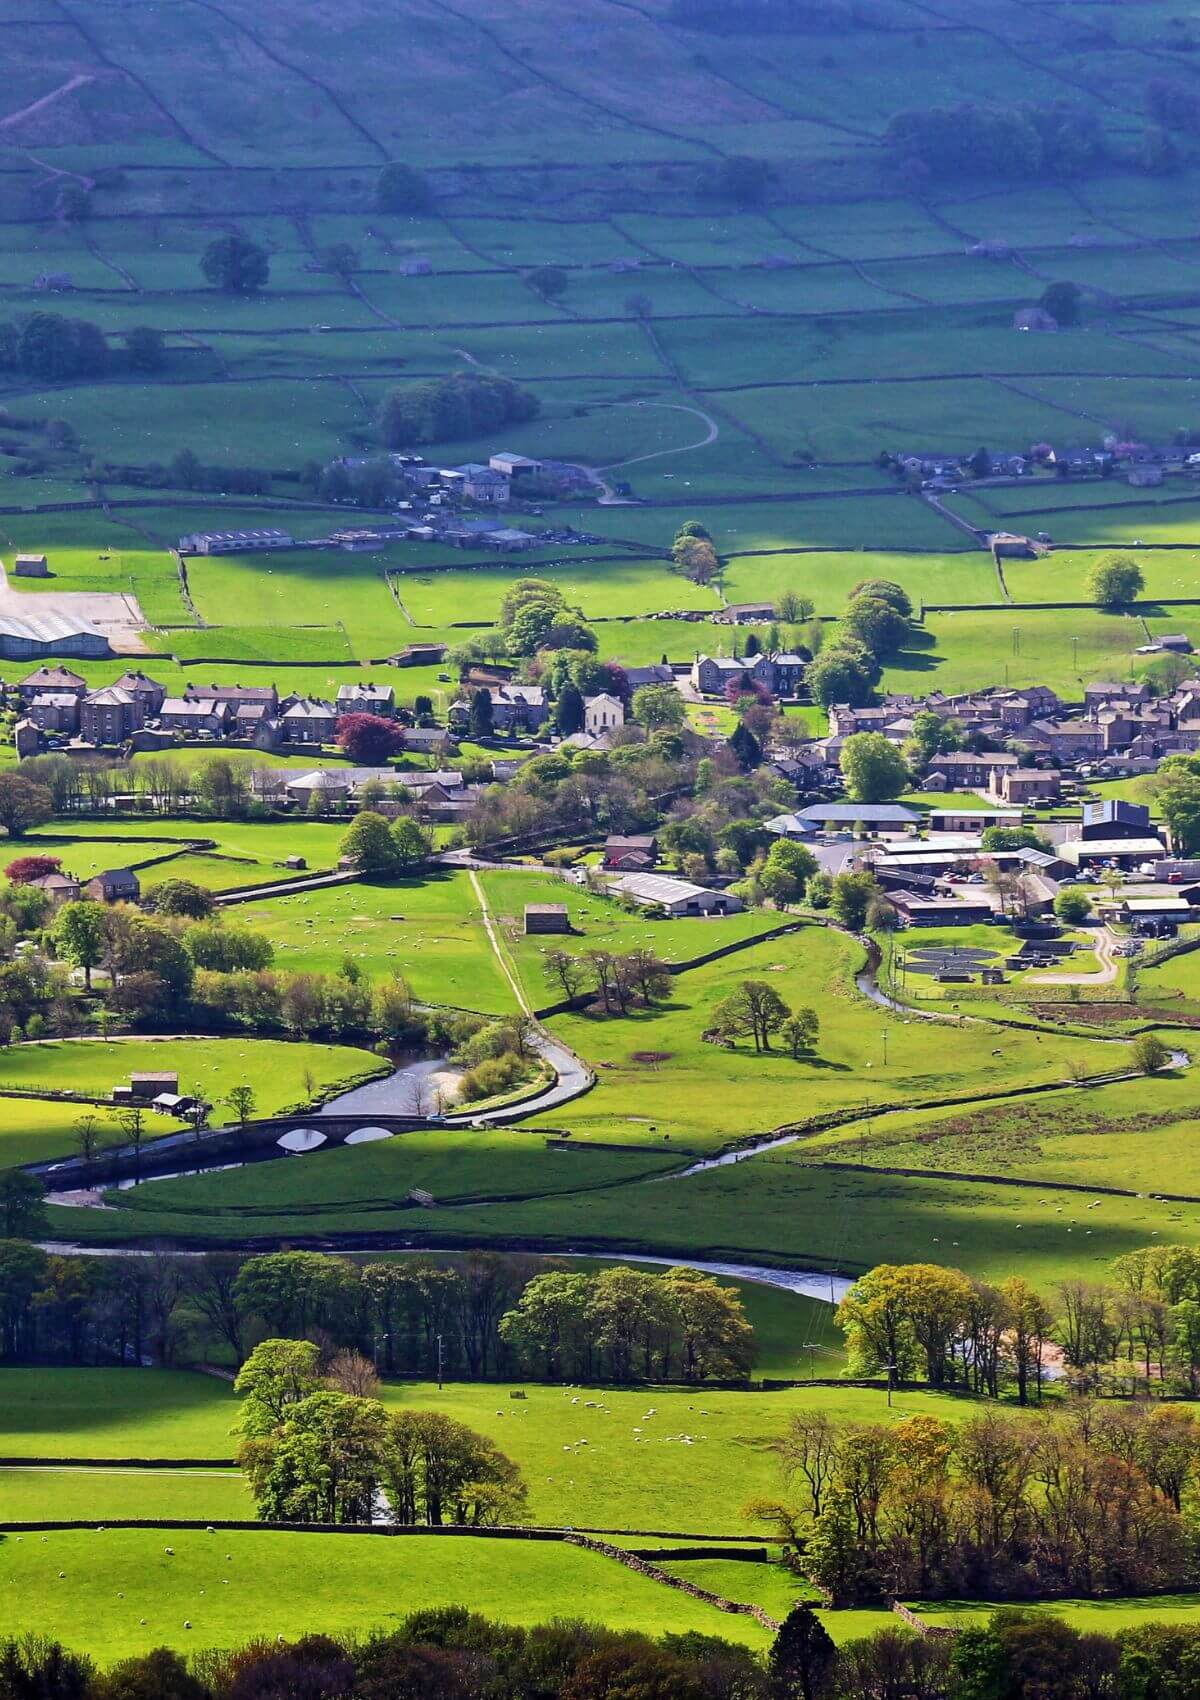 The quaint Yorkshire town of Hawes